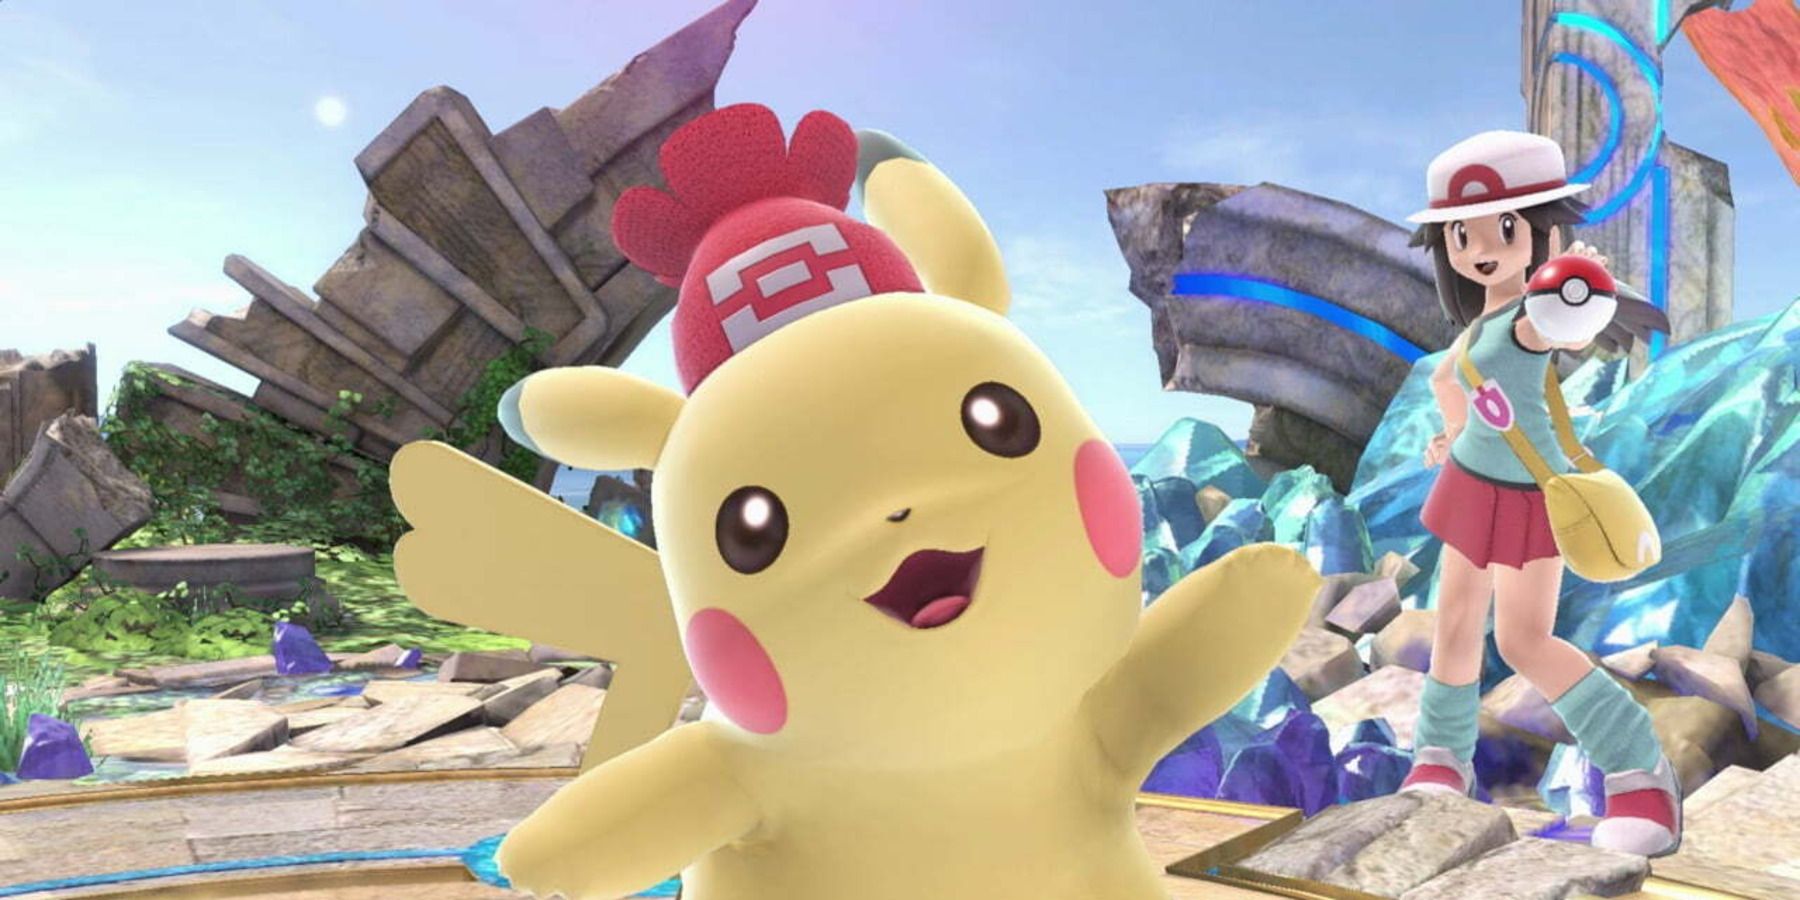 A female Pikachu waving in front of a Pokemon Trainer in Super Smash Bros. Ultimate.